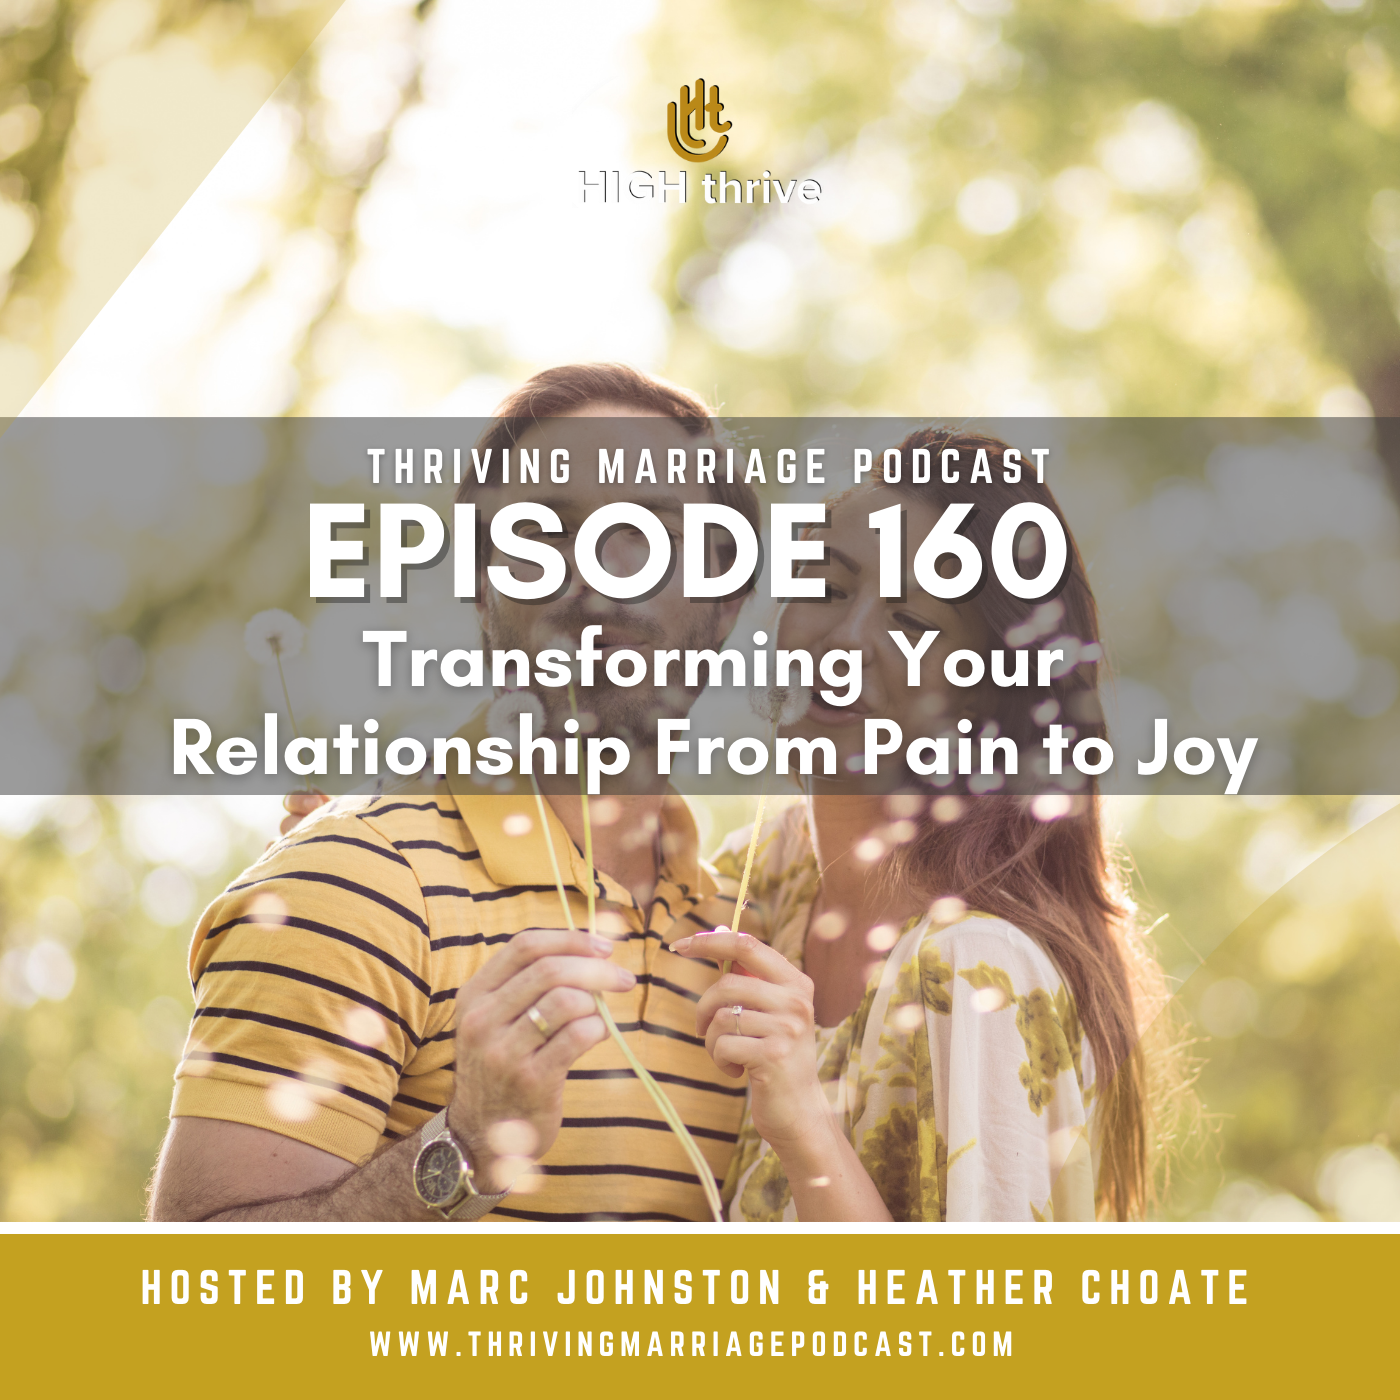 Episode 160: Transforming Your Relationship From Pain to Joy